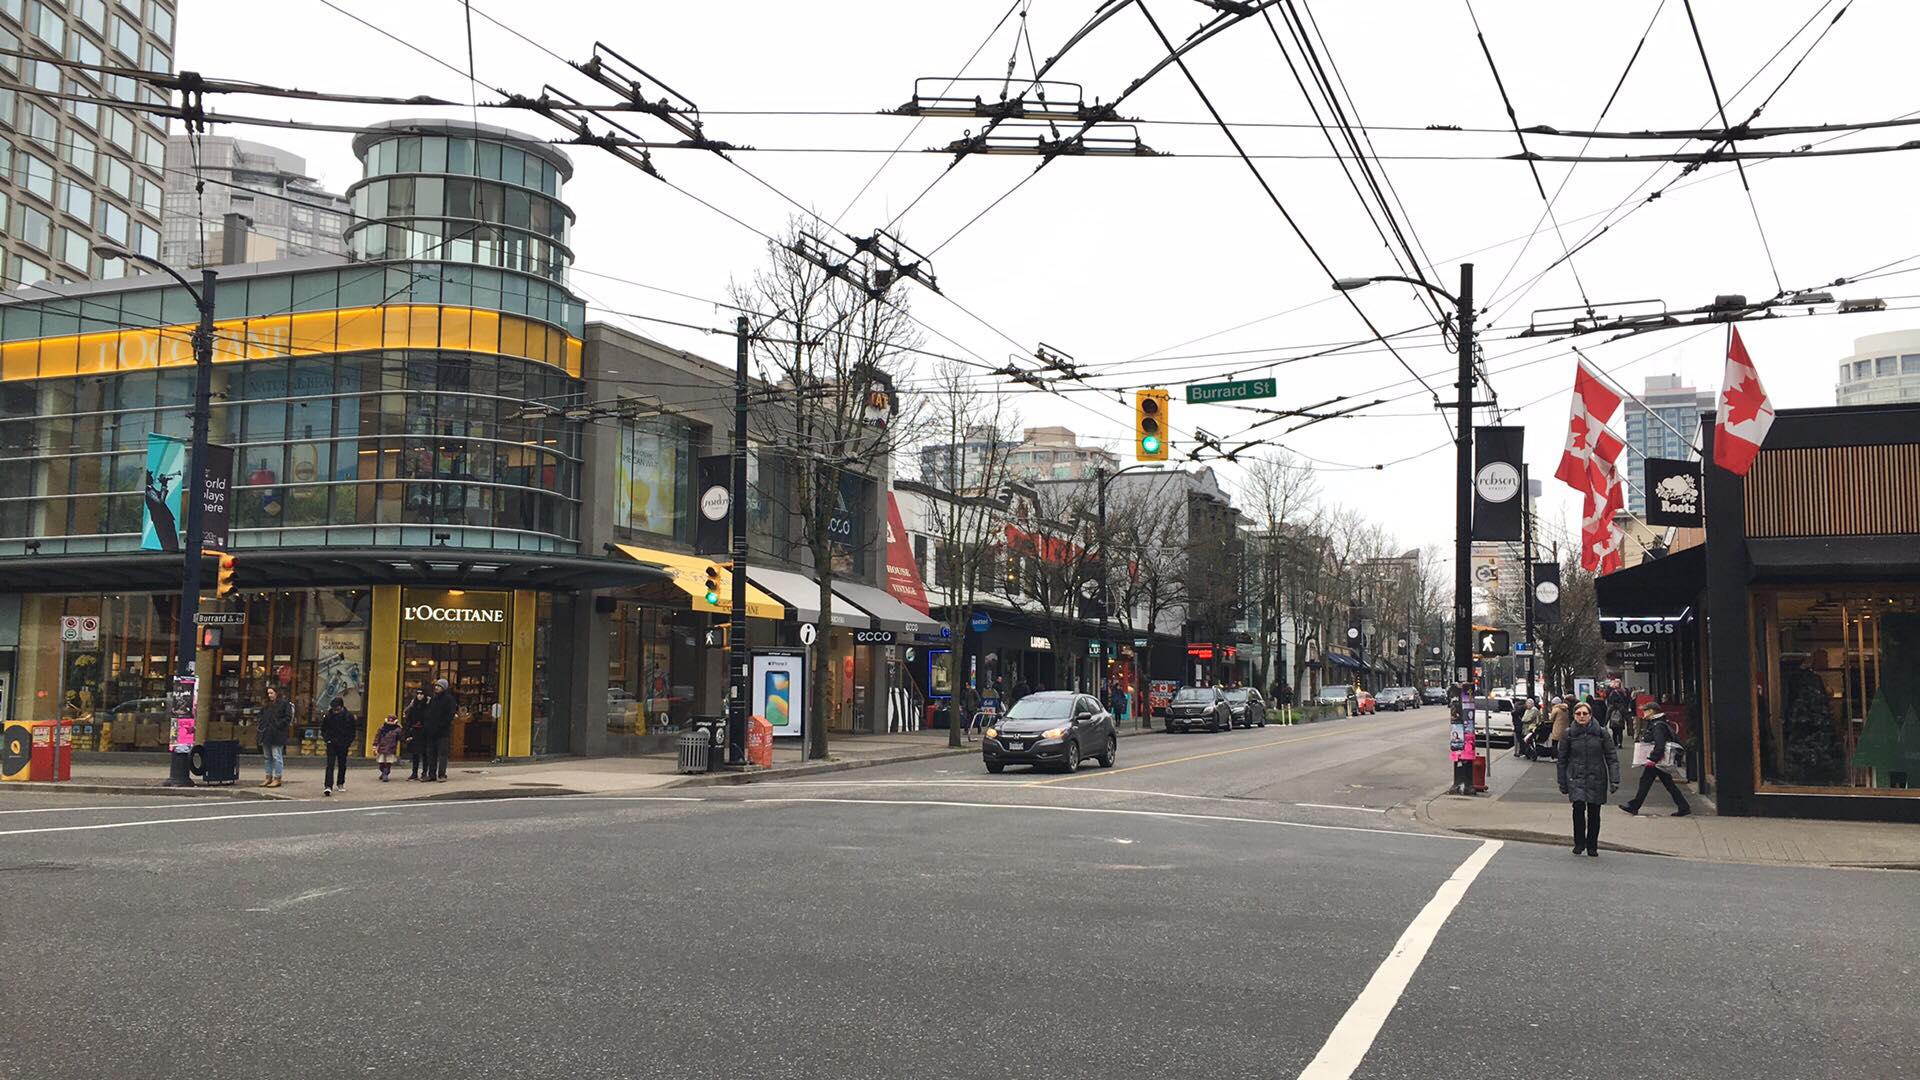 (Robson Street in Vancouver on January 2, 2018. Photo: Lee Rivett for Retail Insider)&nbsp;